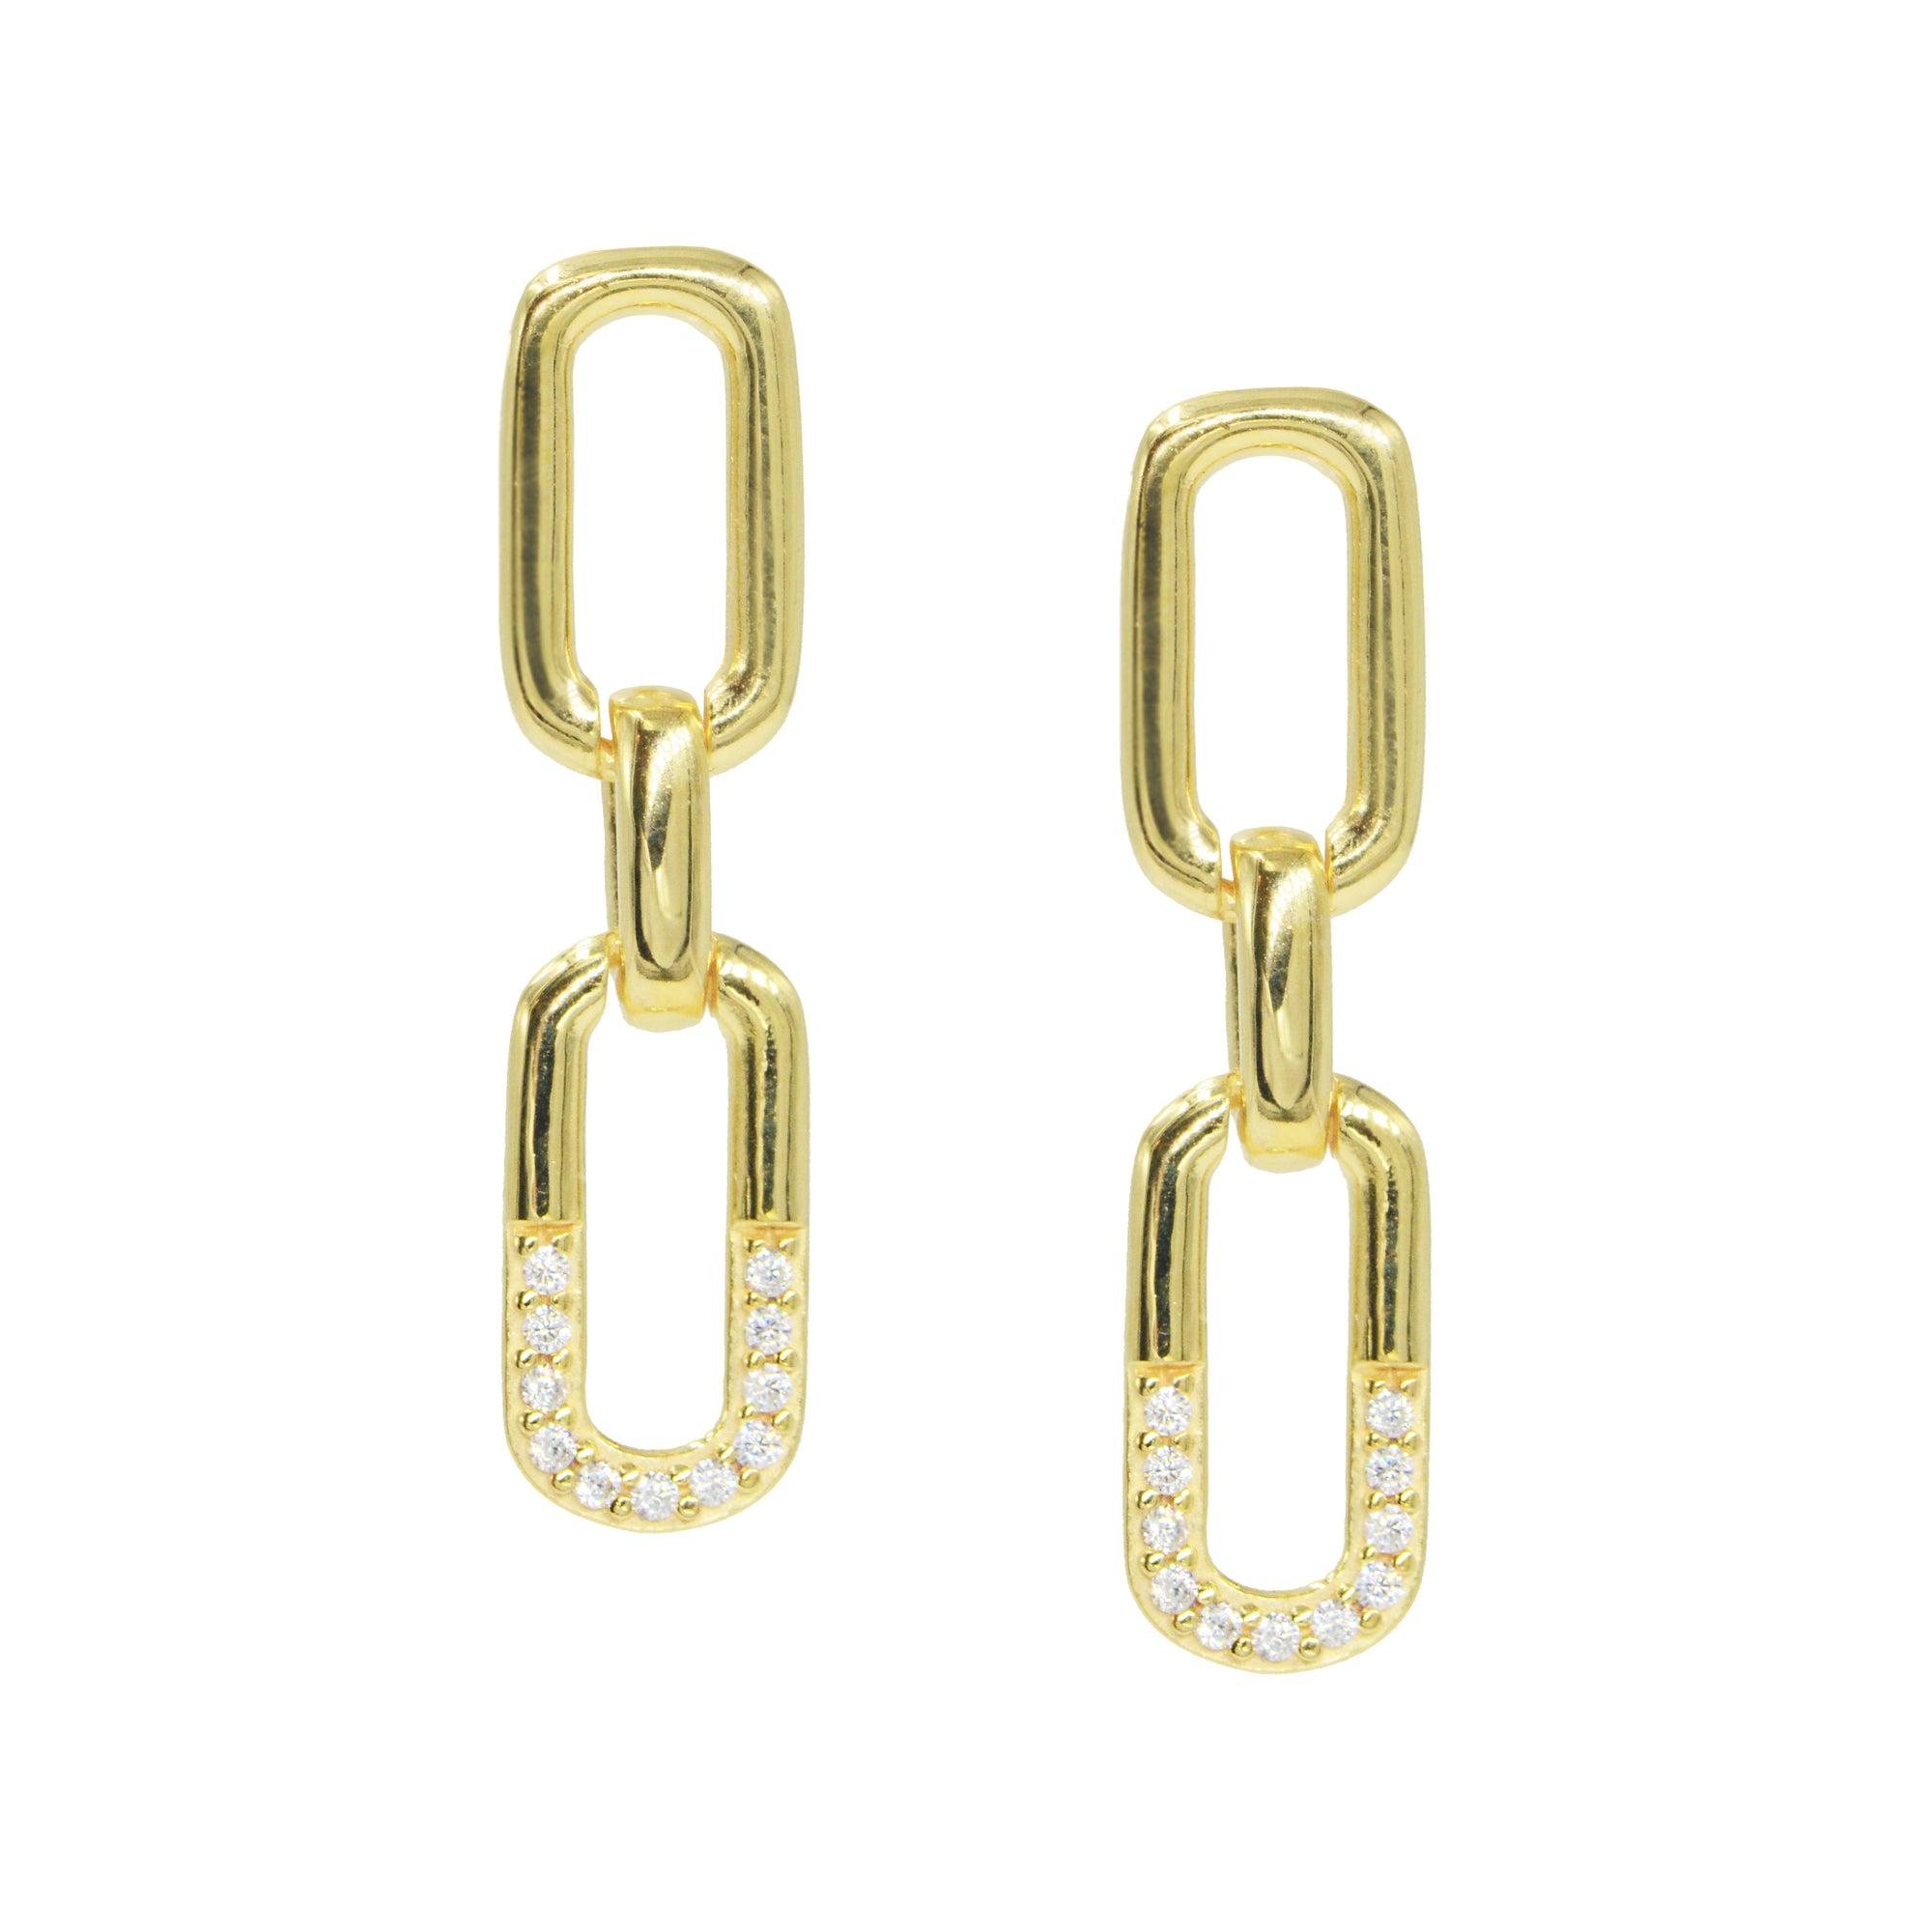 paperclip link dangle earrings with cryals